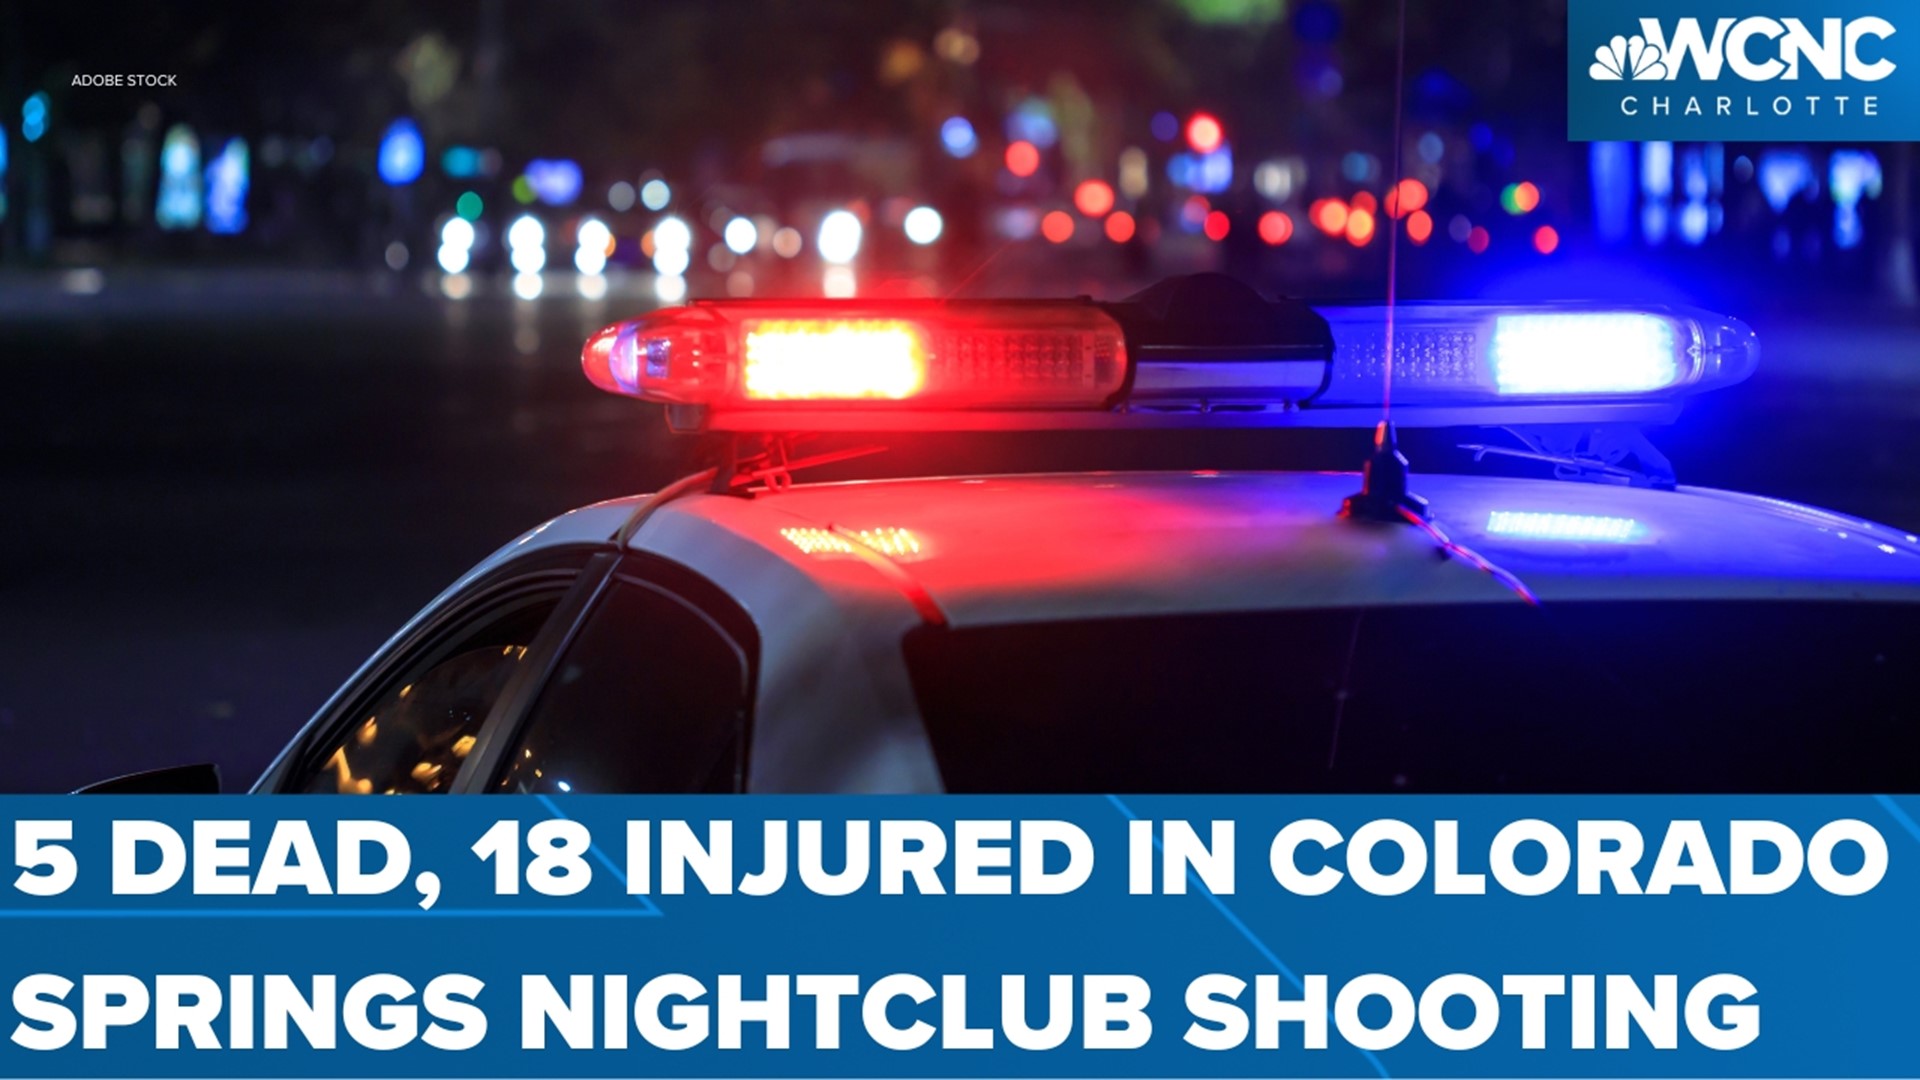 Officials said the 22-year-old gunman walked into the nightclub and immediately began shooting.